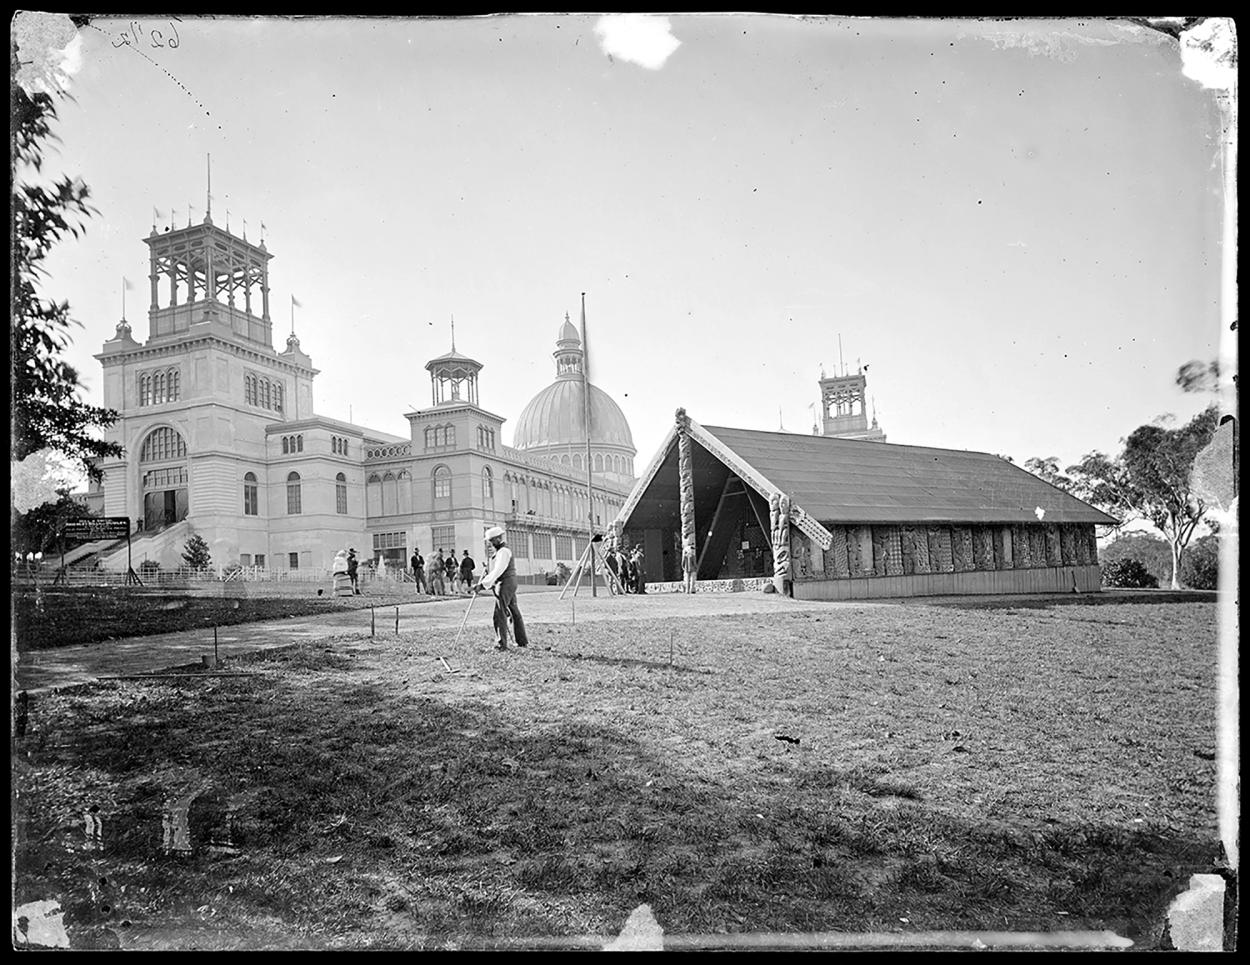 Black and white image of the Garden Palace from a distance featuring a tent and man in the foreground